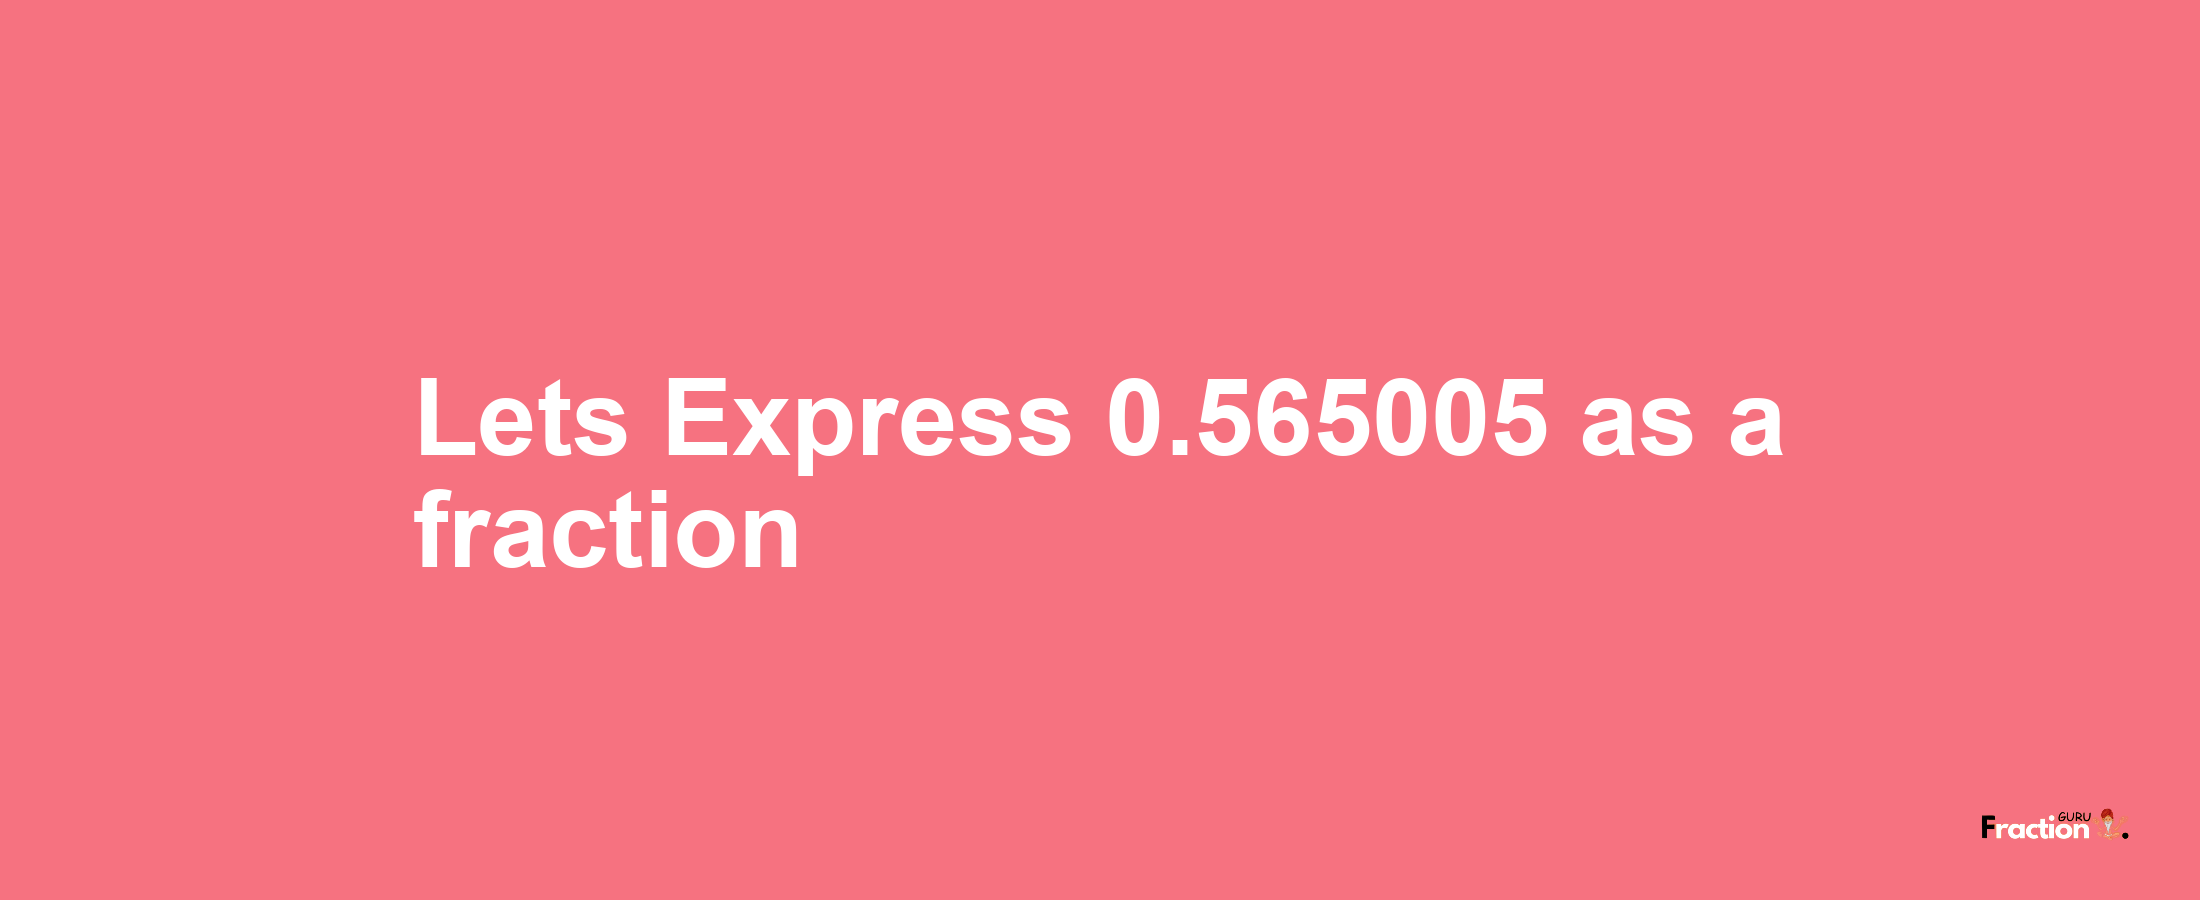 Lets Express 0.565005 as afraction